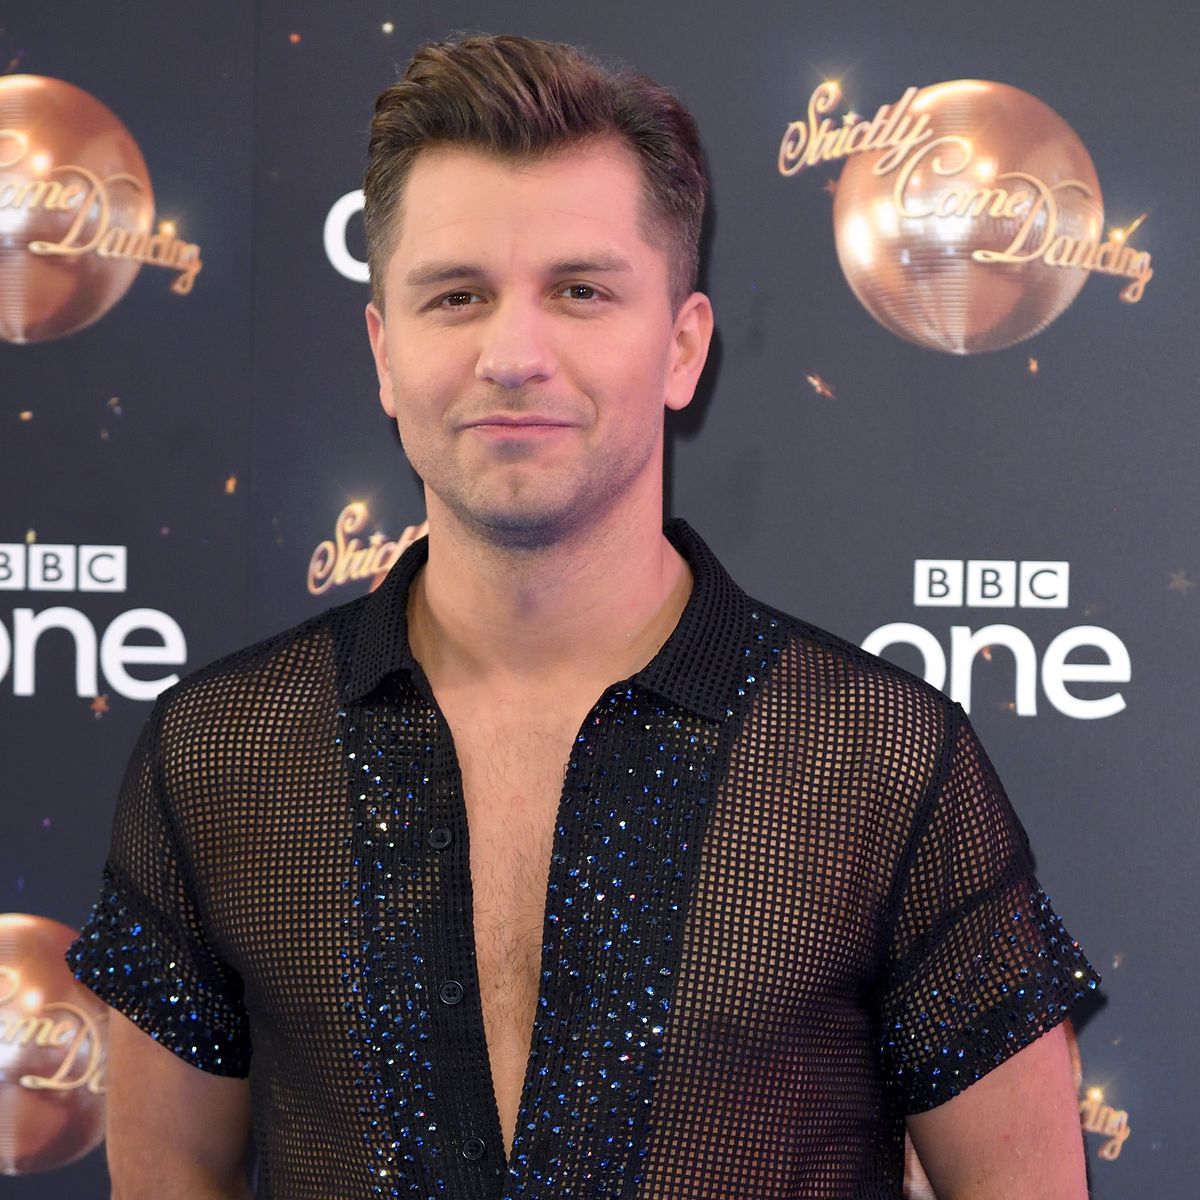 Has Pasha Kovalev been married before? What does Pasha do now? - ABTC